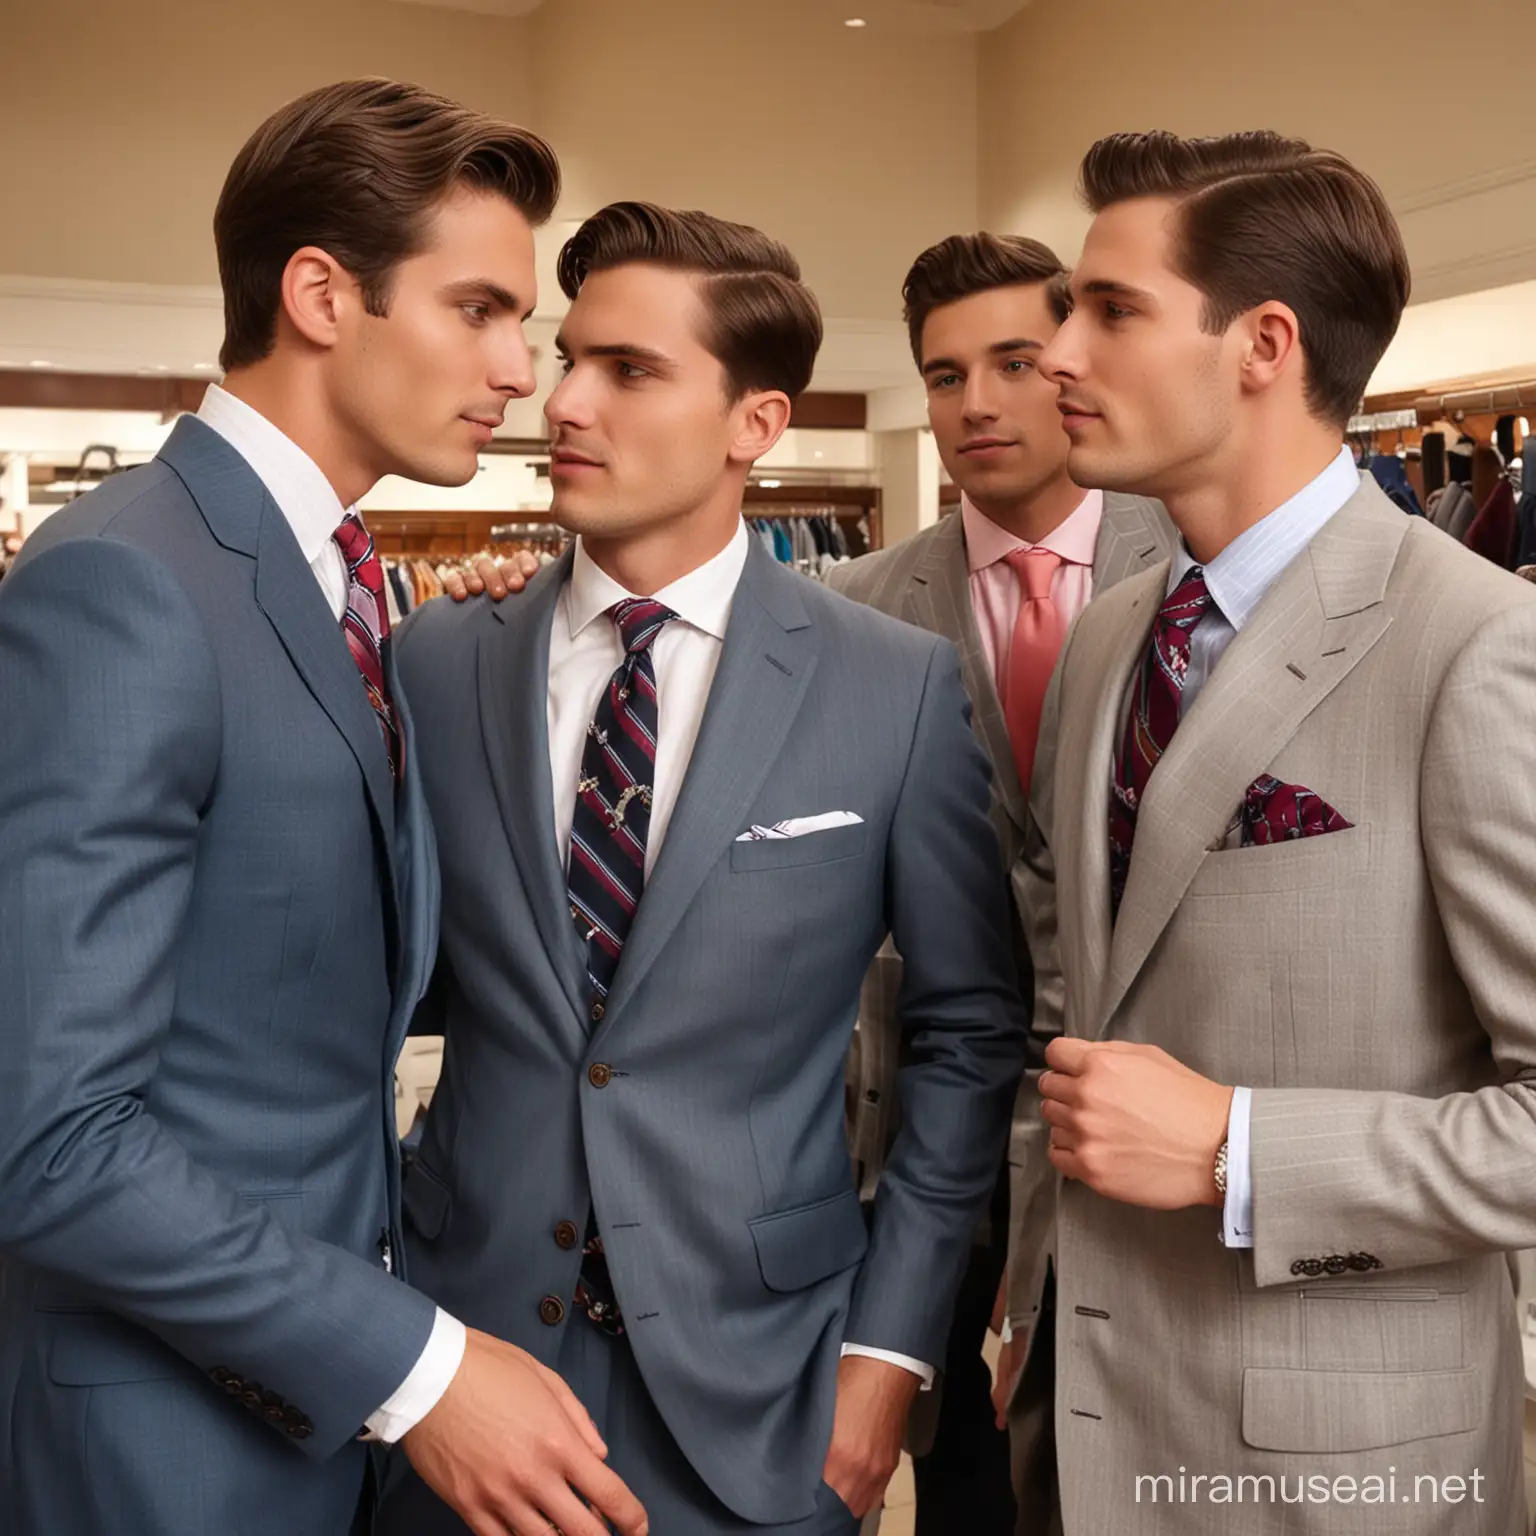 four men trying a new suit and tie, flirting, kissing, in a menswear store, Brooks Brothers, technicolor
